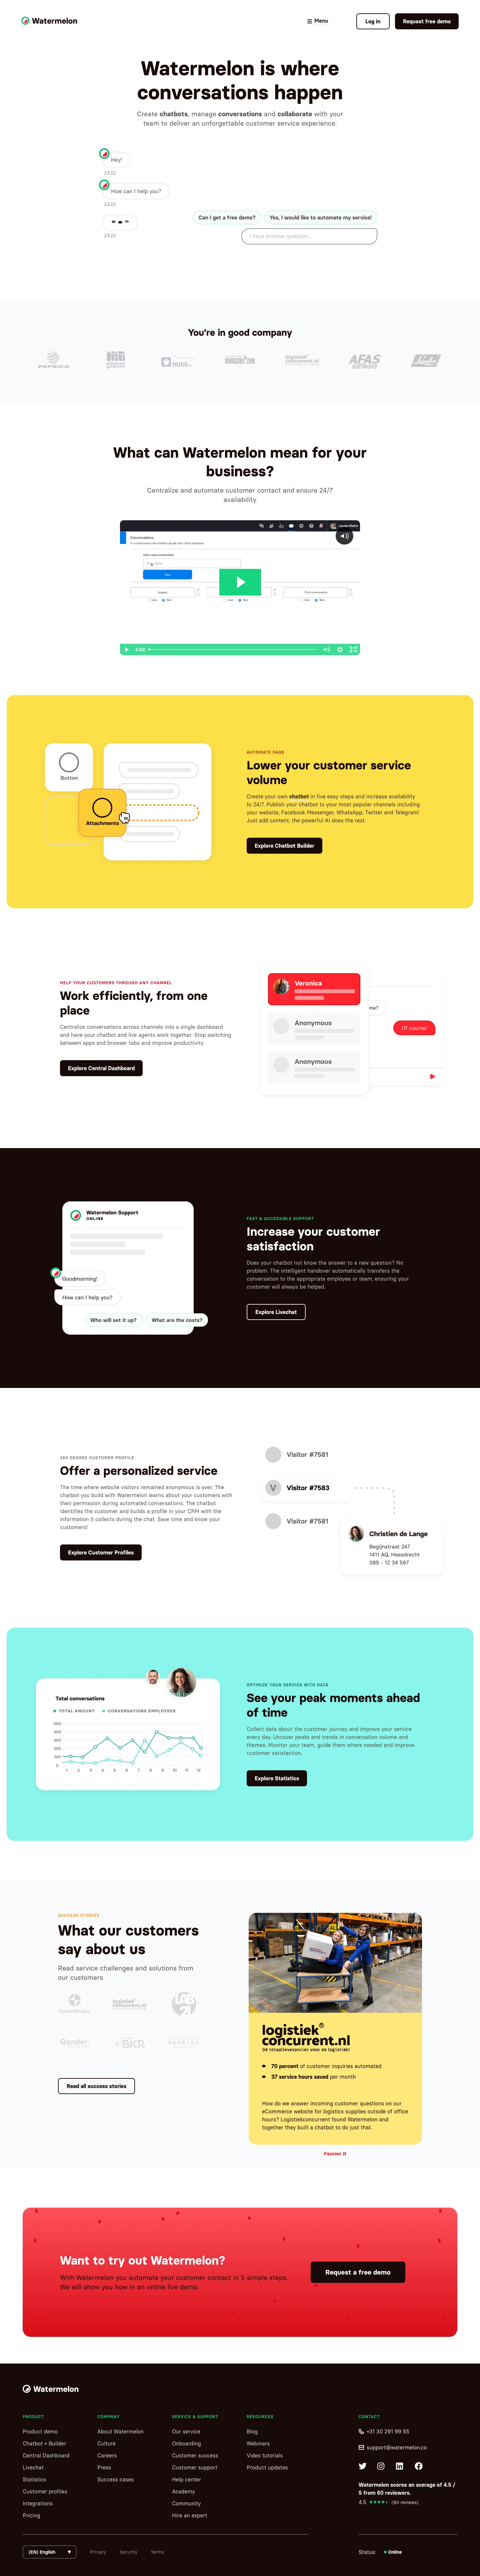 Watermelon Landing Page Example: Watermelon is where conversations happen. Create chatbots, manage conversations and collaborate with your team to deliver an unforgettable customer service experience.